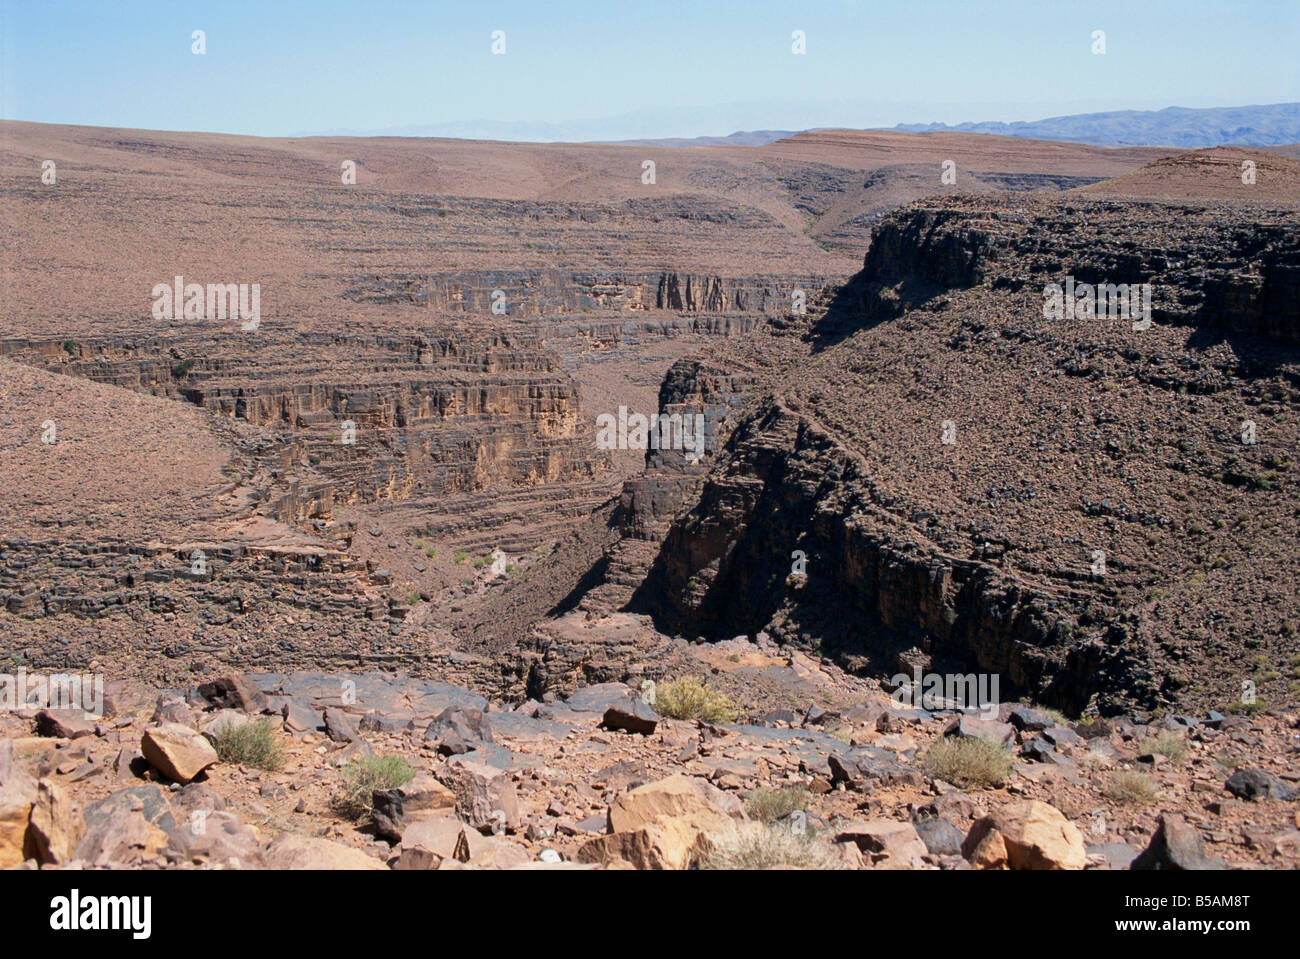 Landscape near Agdz Morocco Africa R H Productions Stock Photo